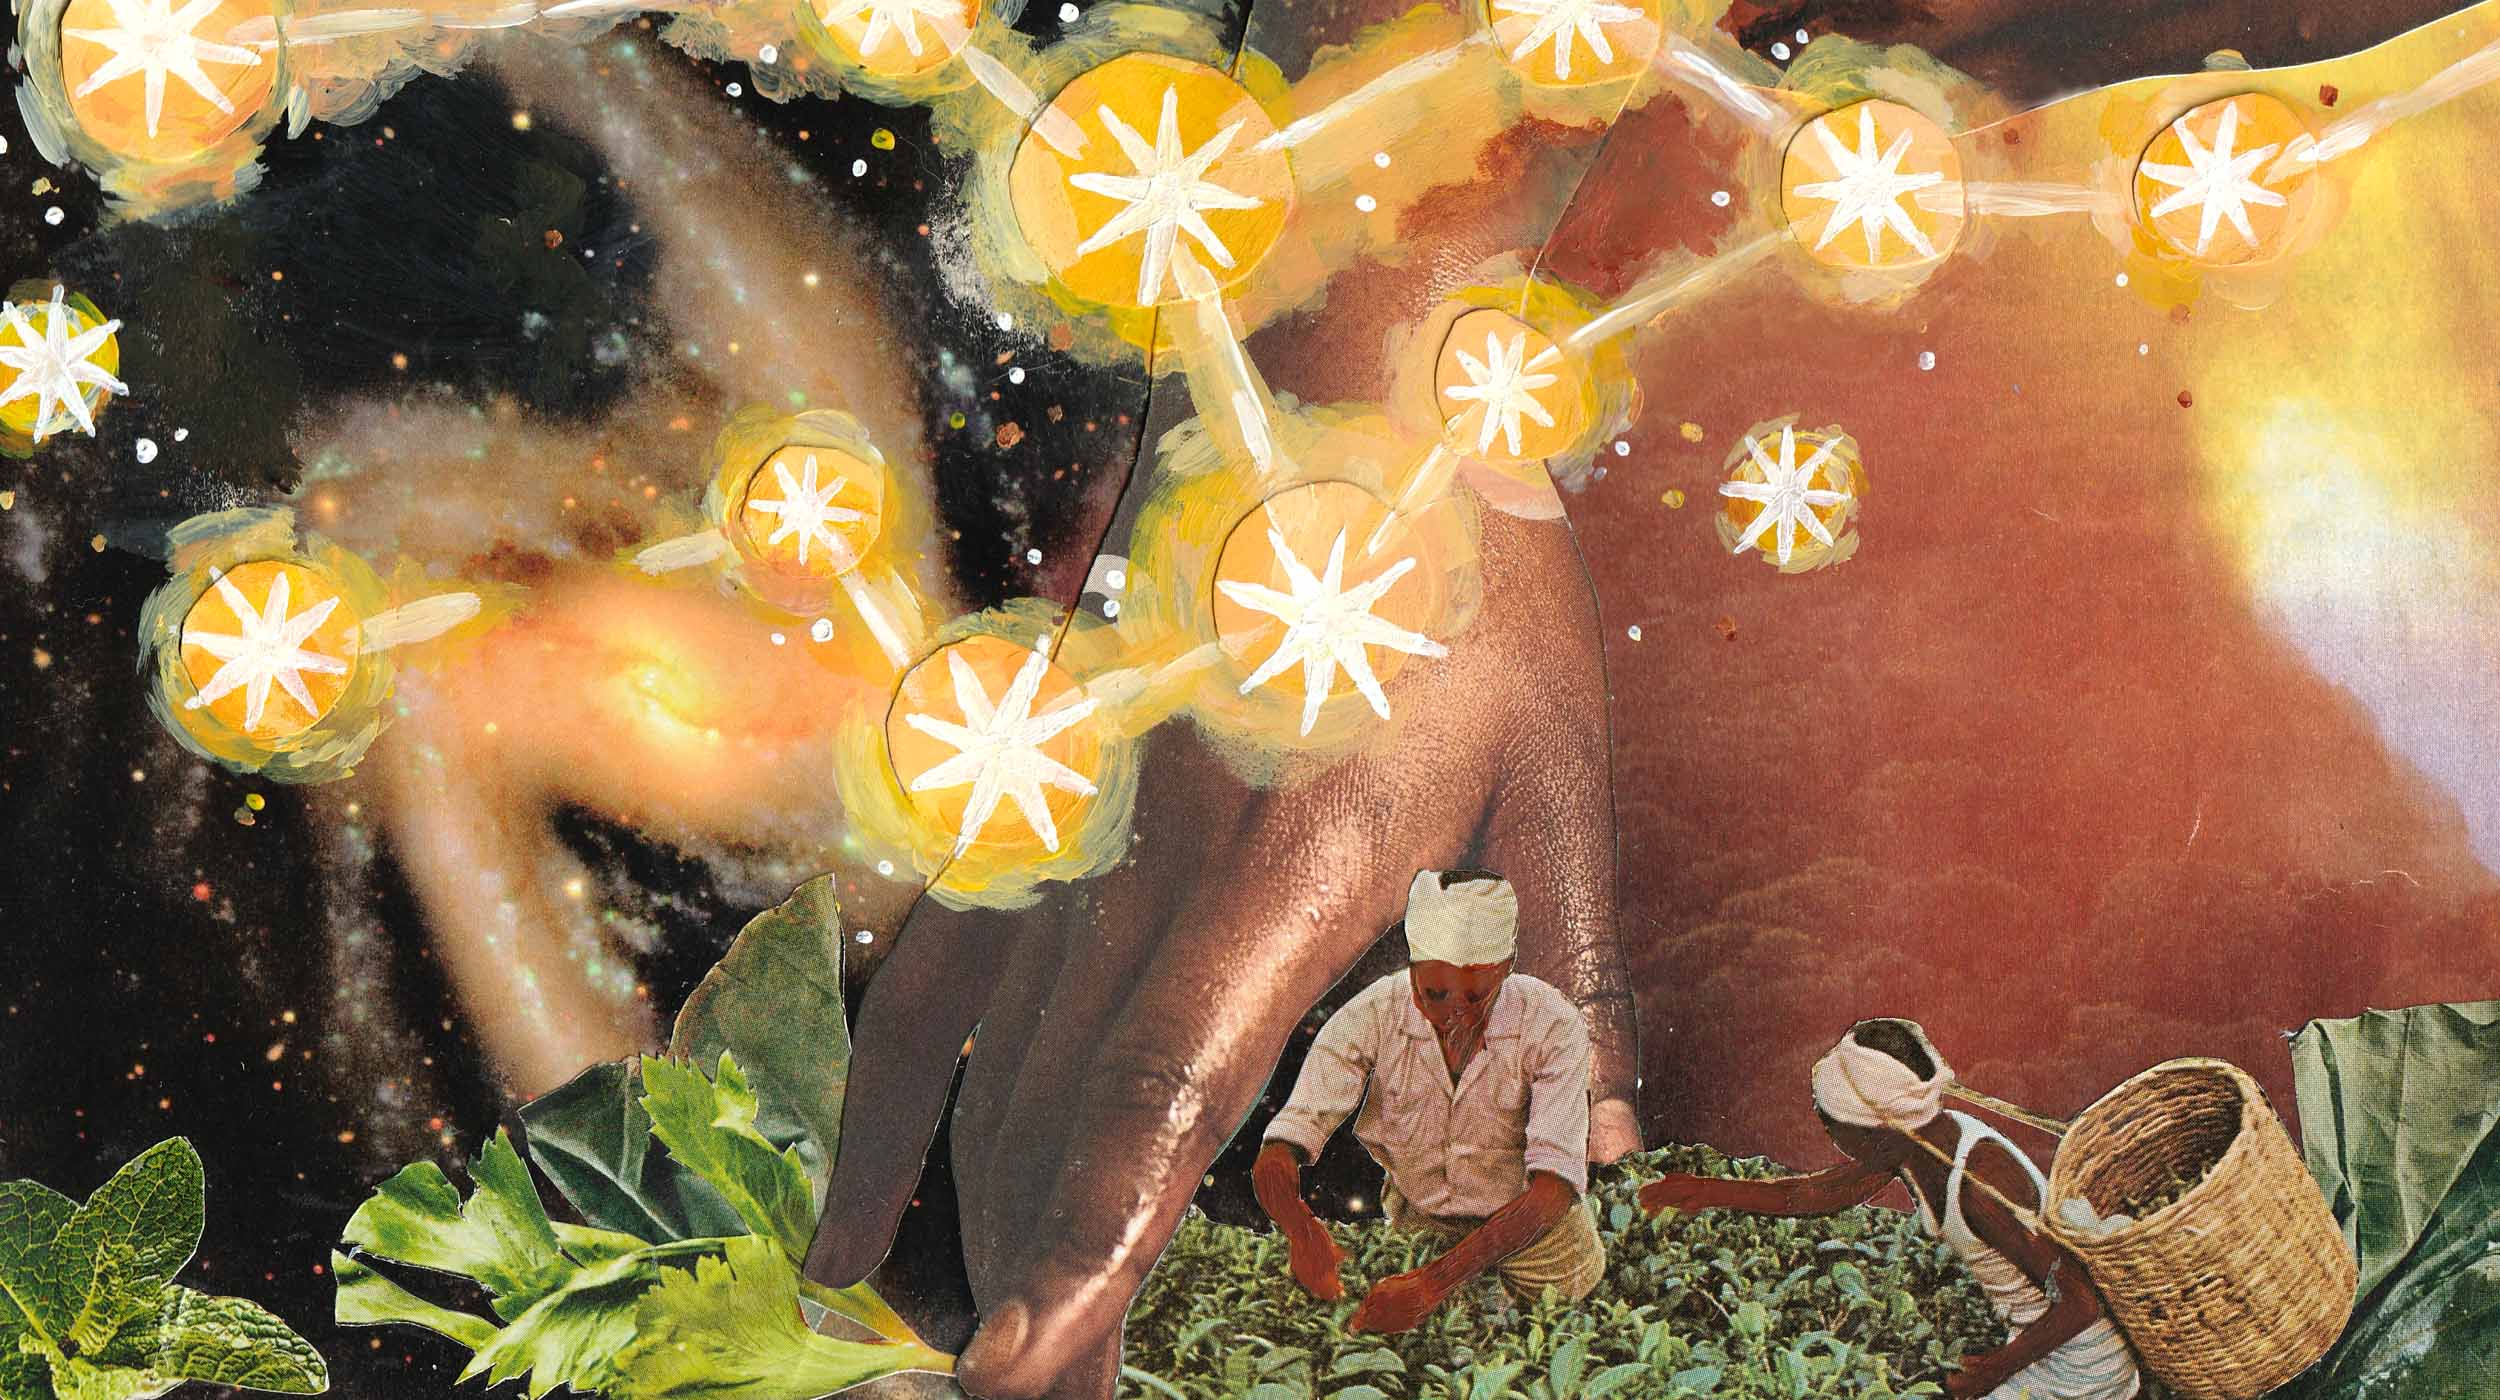 A mixed medium collage of stars and cut outs of space, crops, people harvesting greens. October 2022